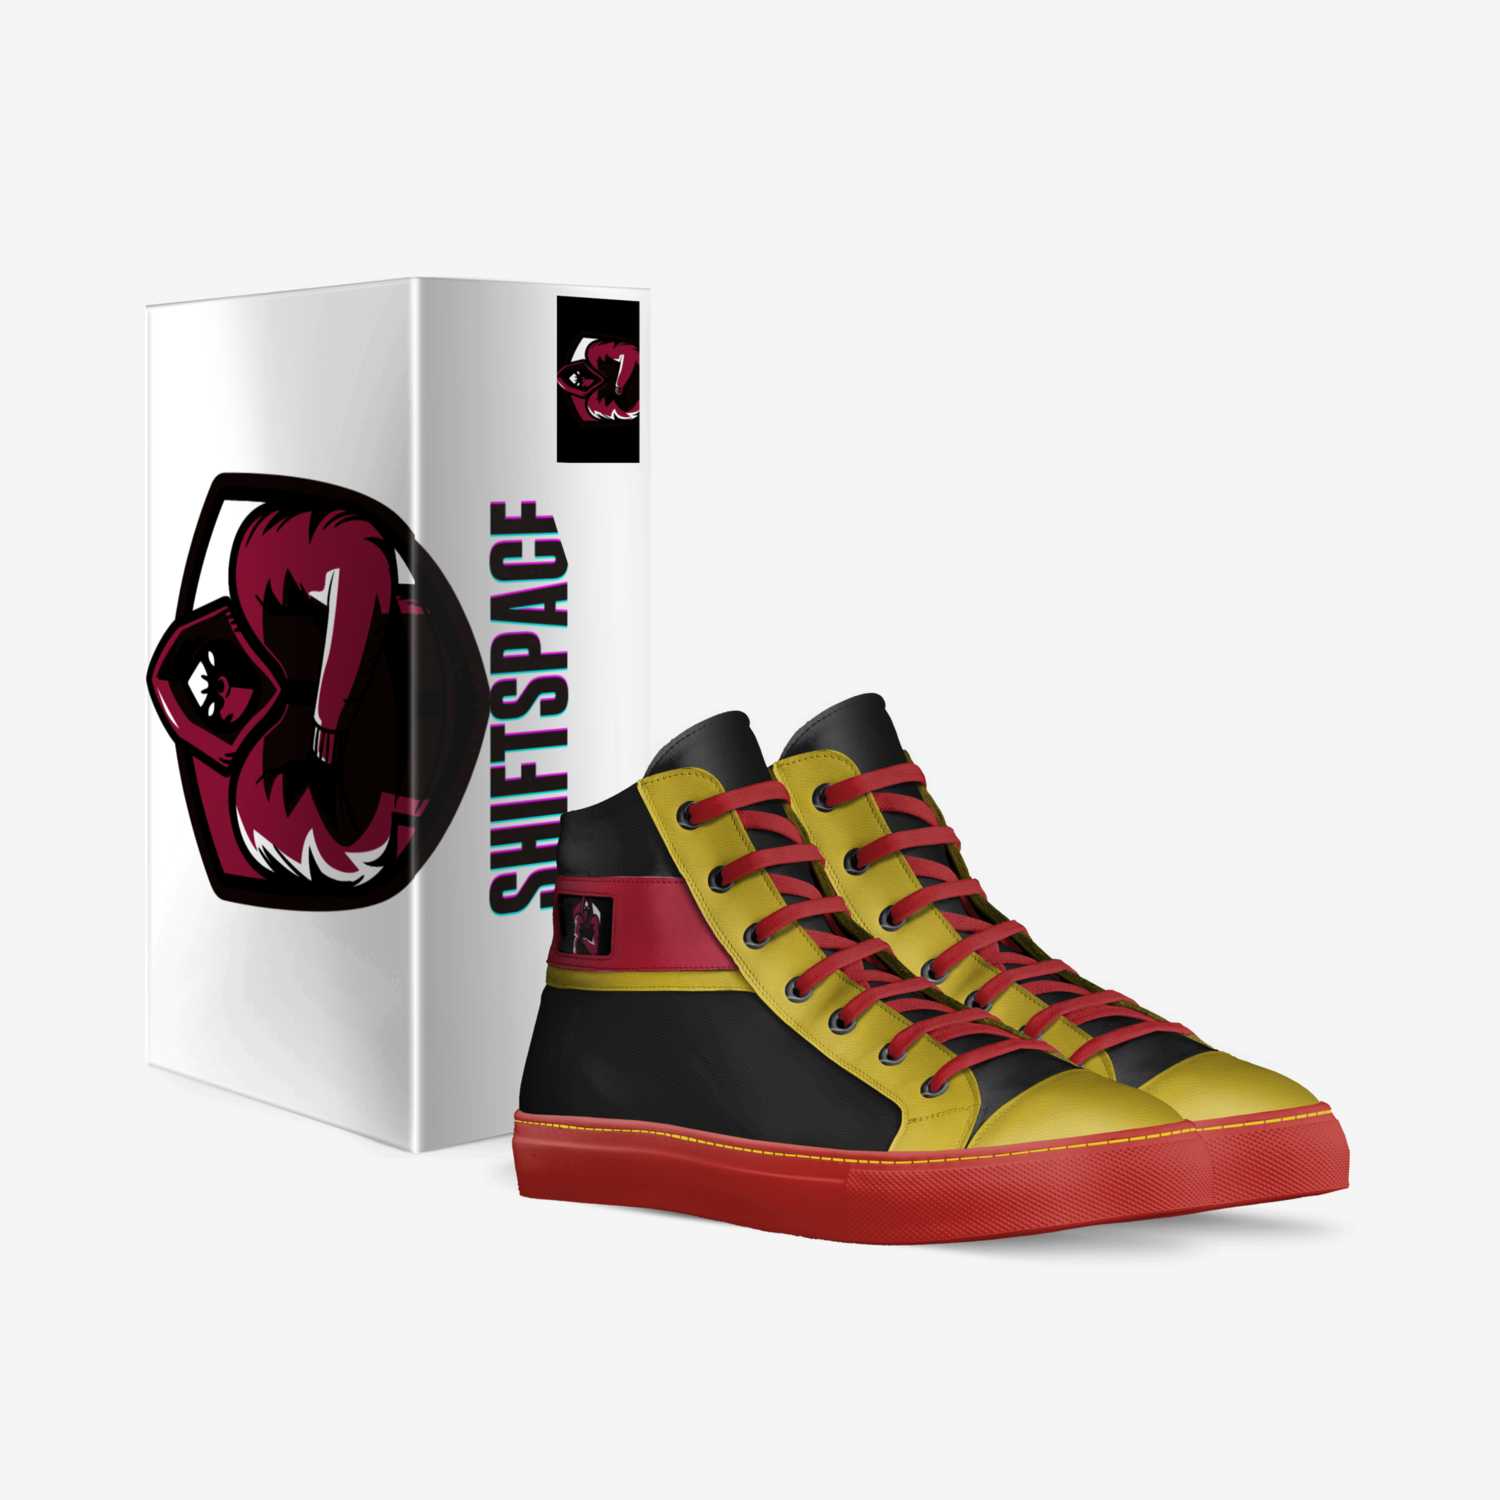 shiftspace custom made in Italy shoes by Joanel Boujot | Box view